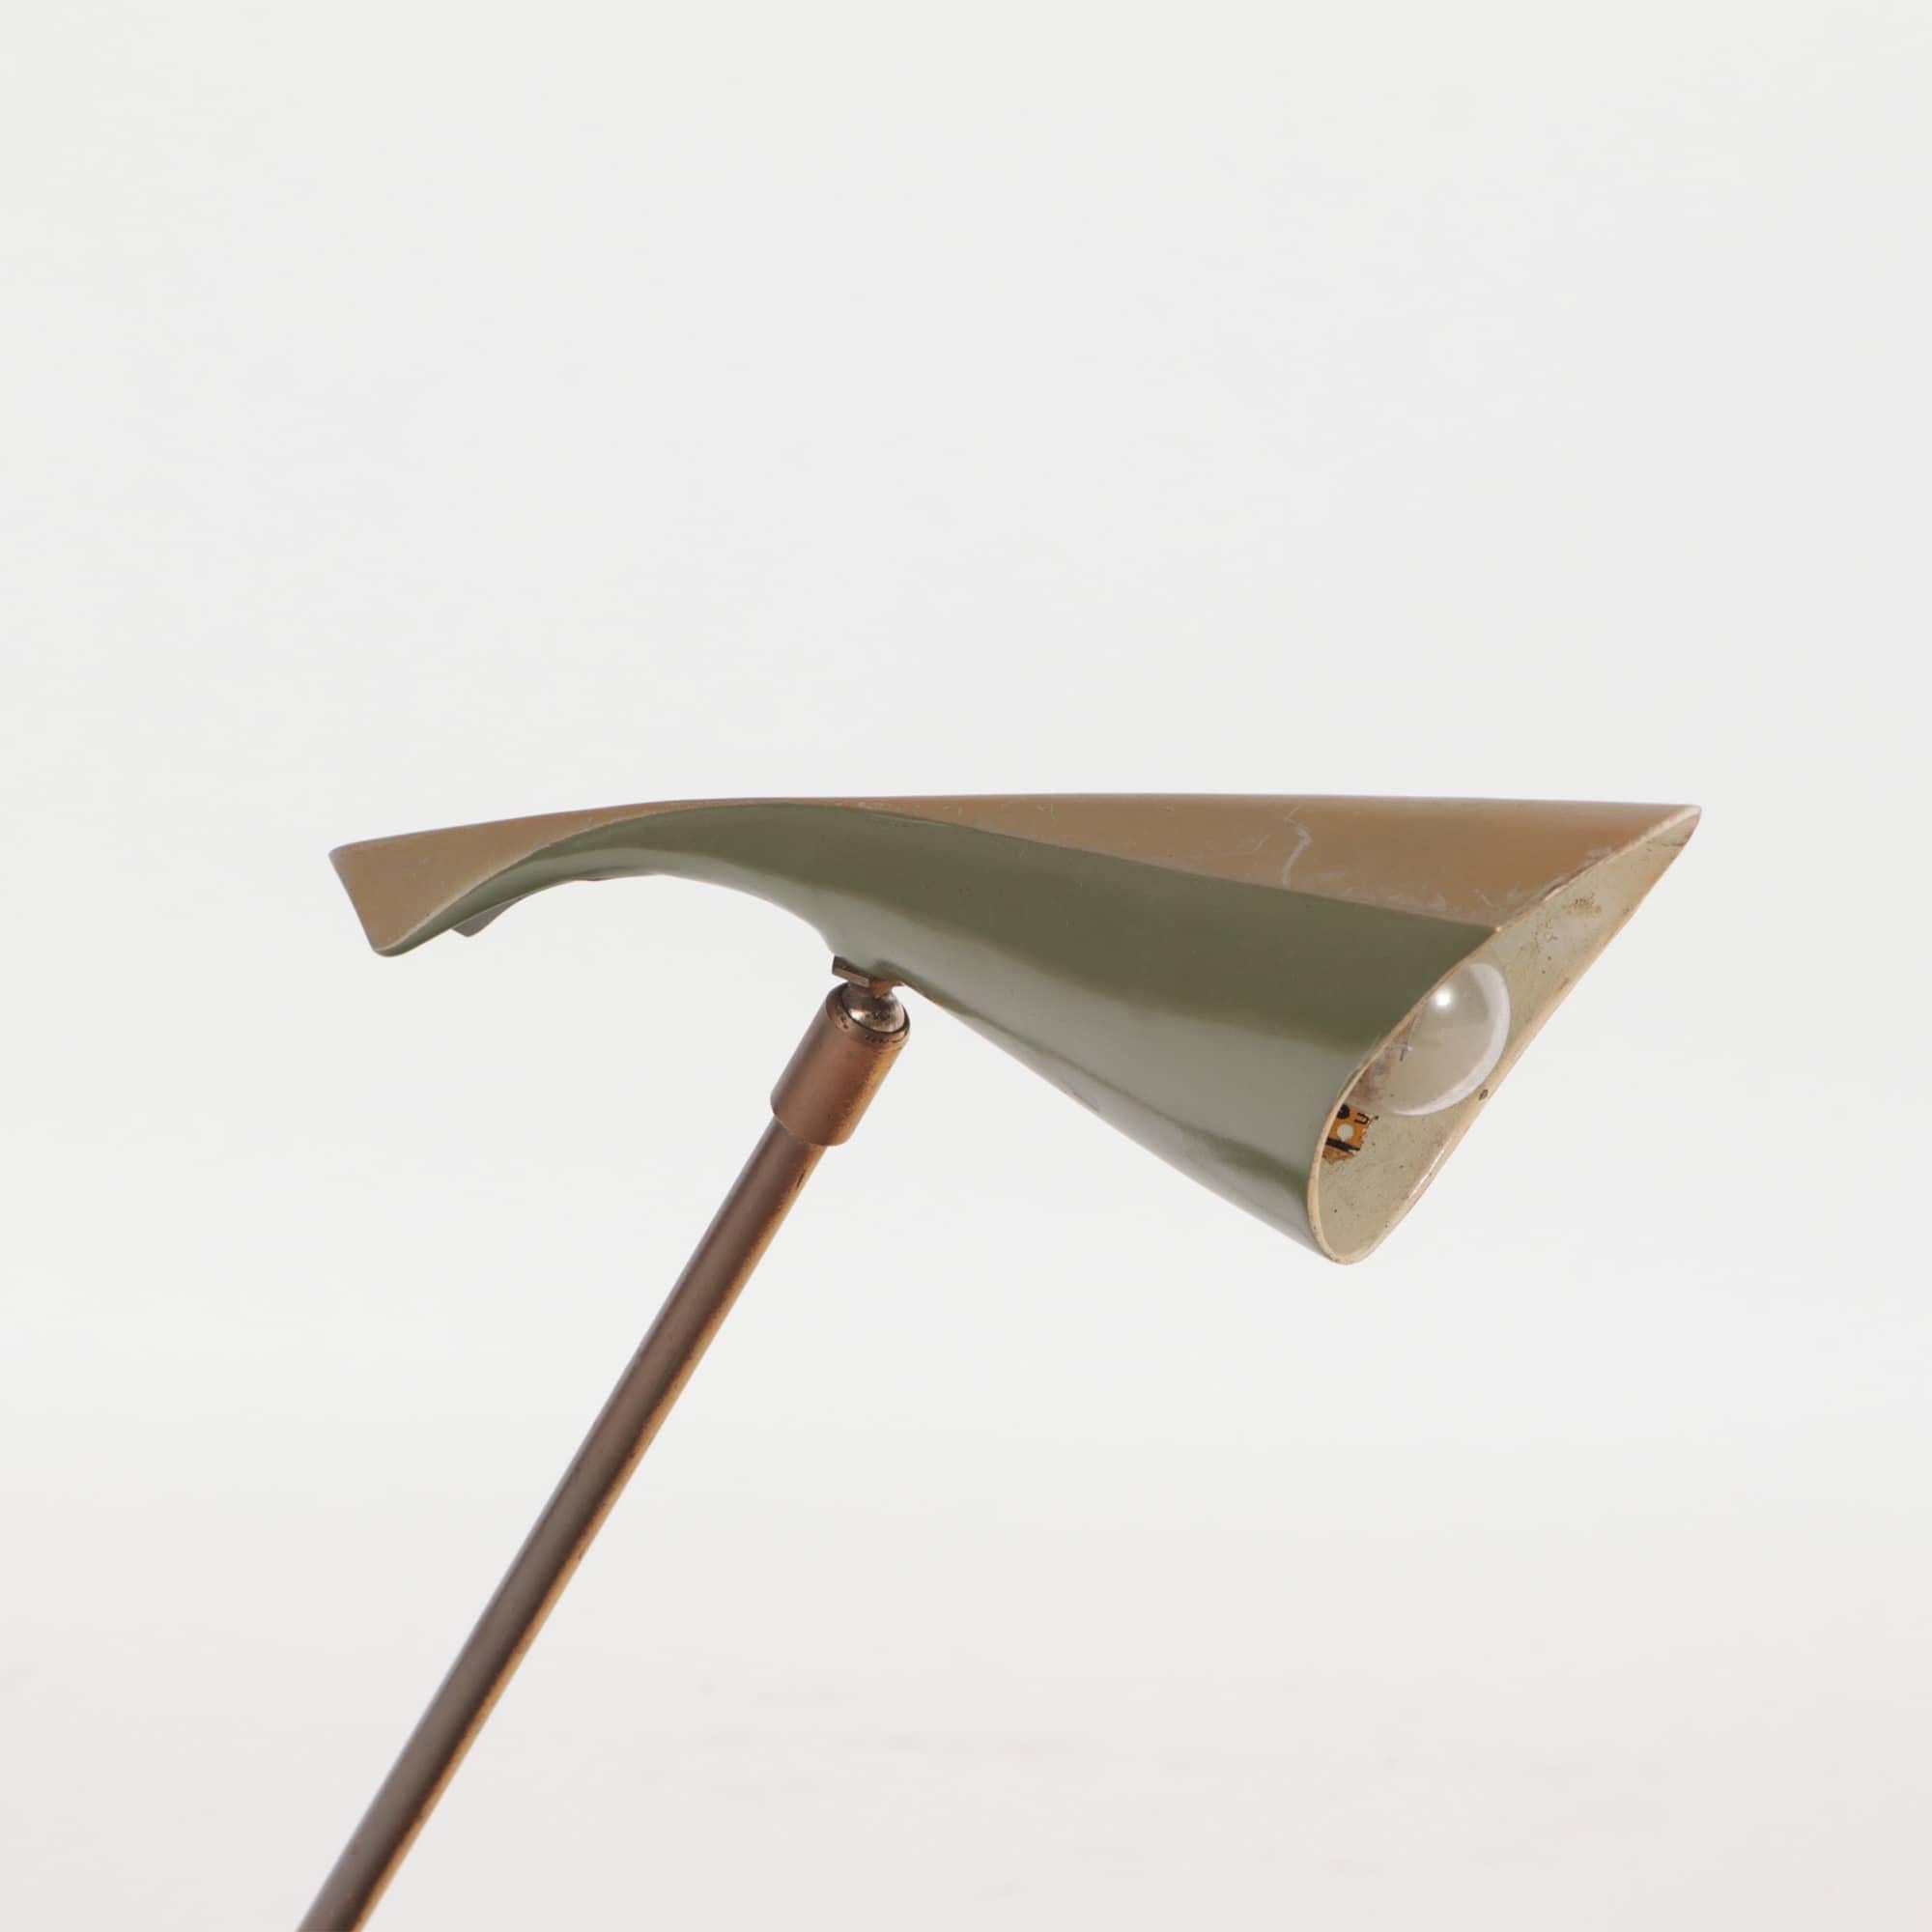 A Mid-Century Modern futuristic olive green enameled metal and brass Laurel desk lamp circa 1950.